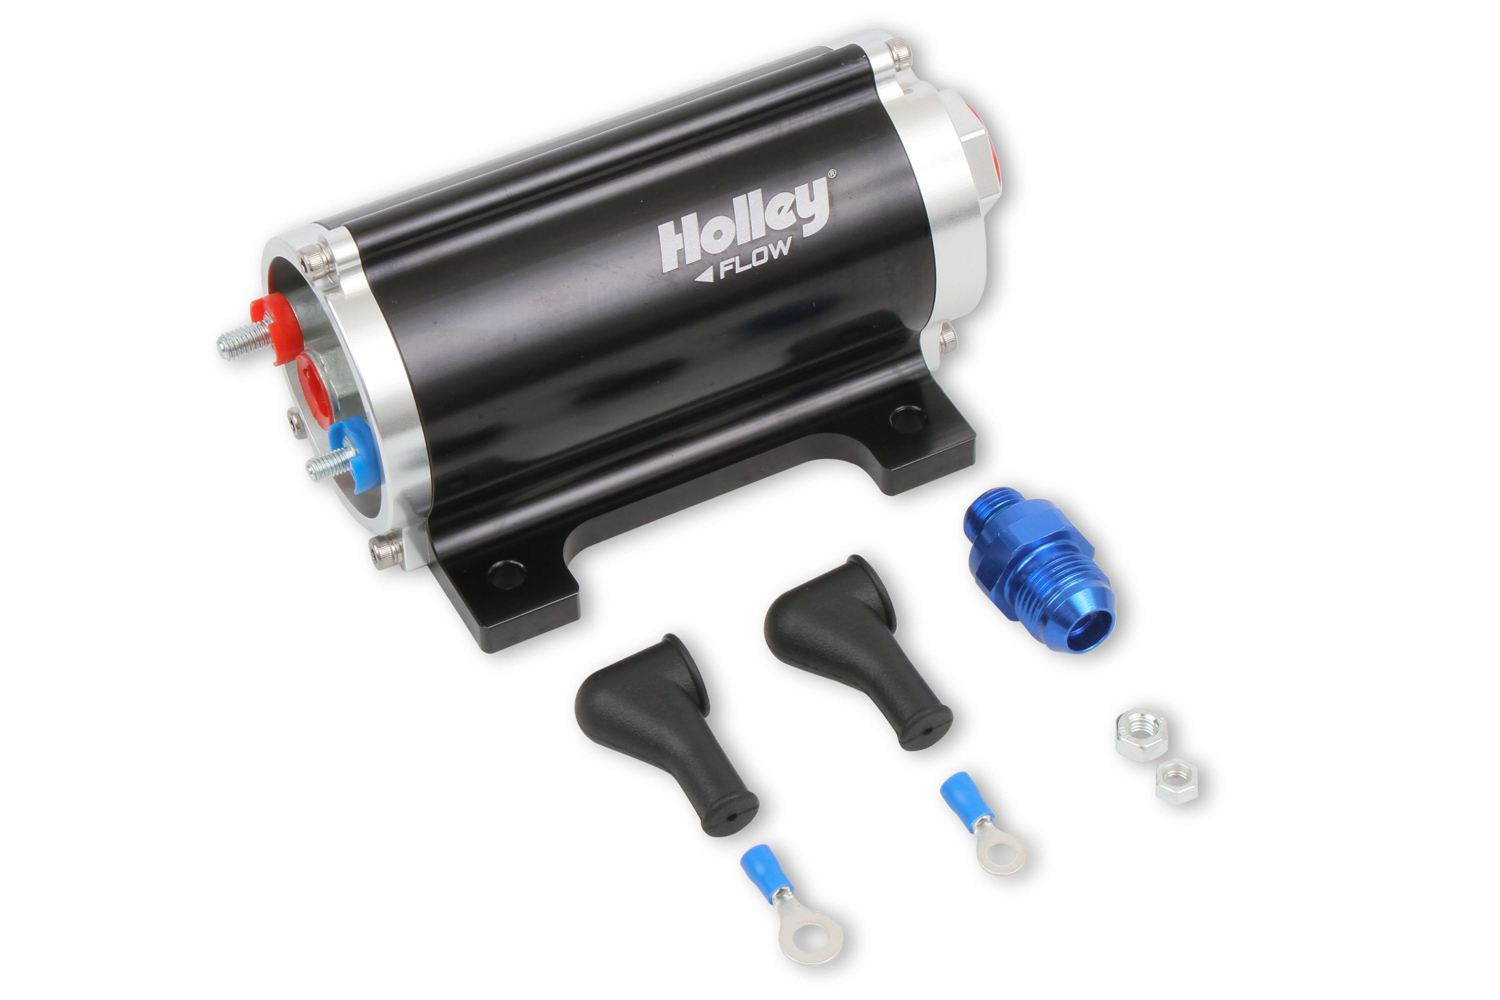 Holley 12-170 Fuel Pump, Electric, In-Line, 100 gph at 8 psi, 8 AN O-Ring Female Inlet, 6 AN O-Ring Female Outlet, Bracket Included, Aluminum, Black Anodized, E85 / Diesel / Gas, Each